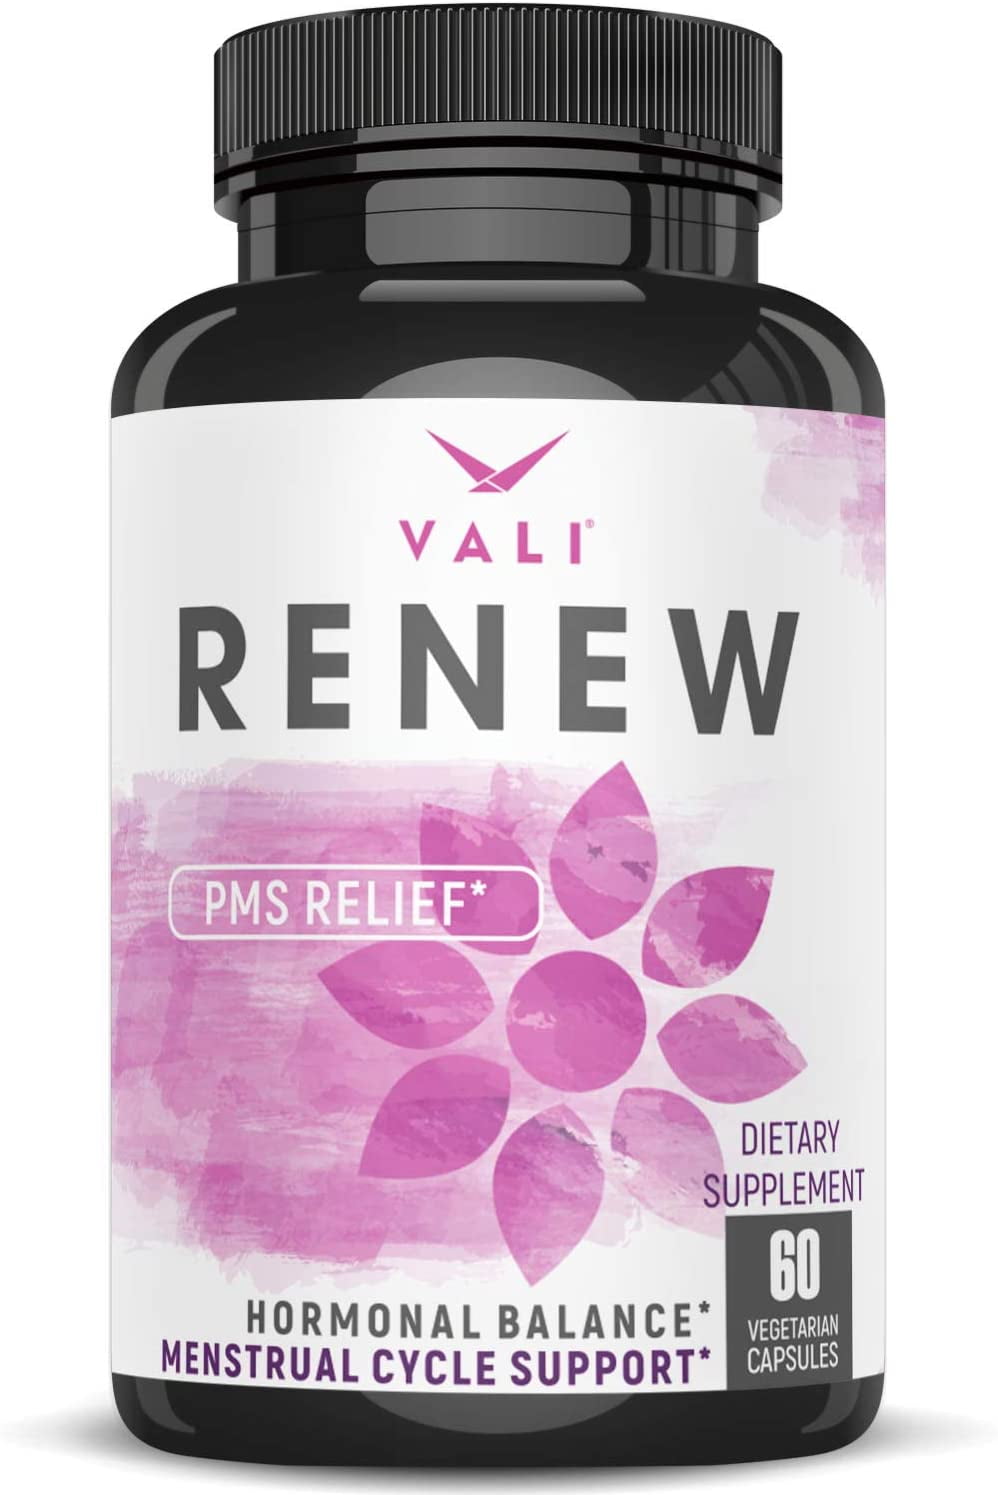 PMS Relief (Menstrual Pain Relief) 80 ct – Shield-Safety